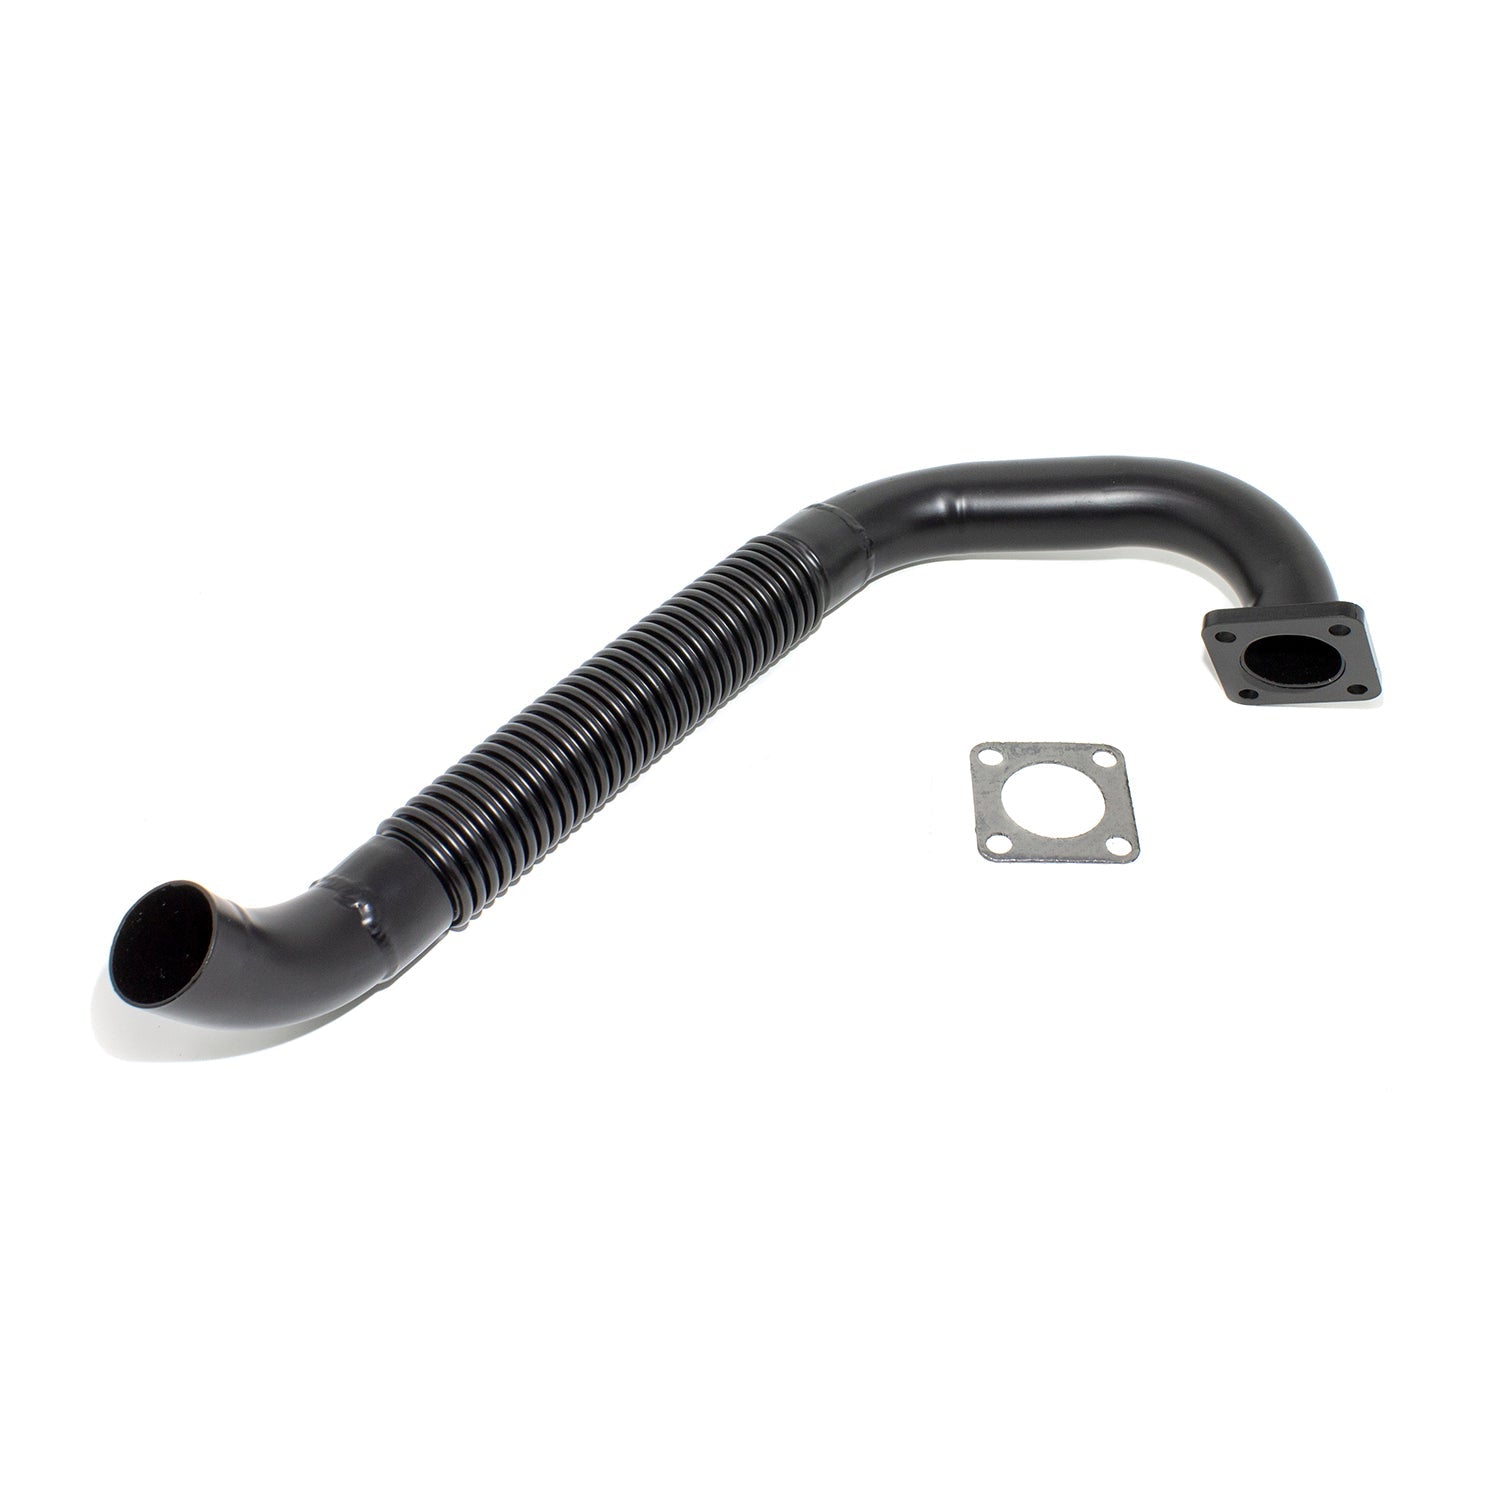 Duraforce 6701151, Exhaust Pipe Kit For Bobcat